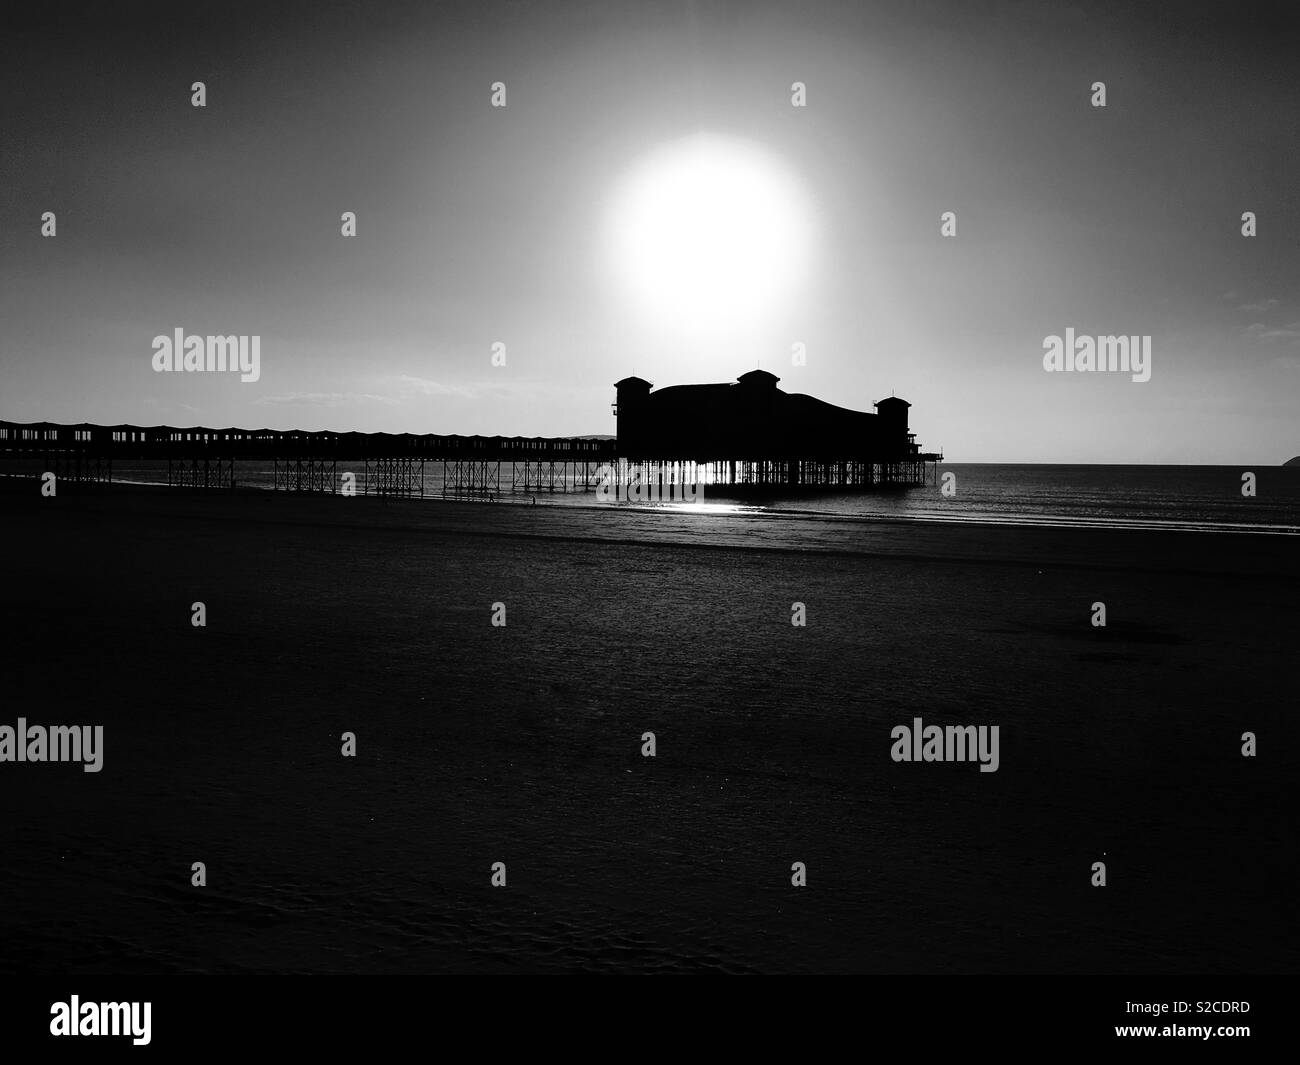 The Grand Pier in Weston-super-Mare, UK silhouetted against the setting sun on an October afternoon Stock Photo